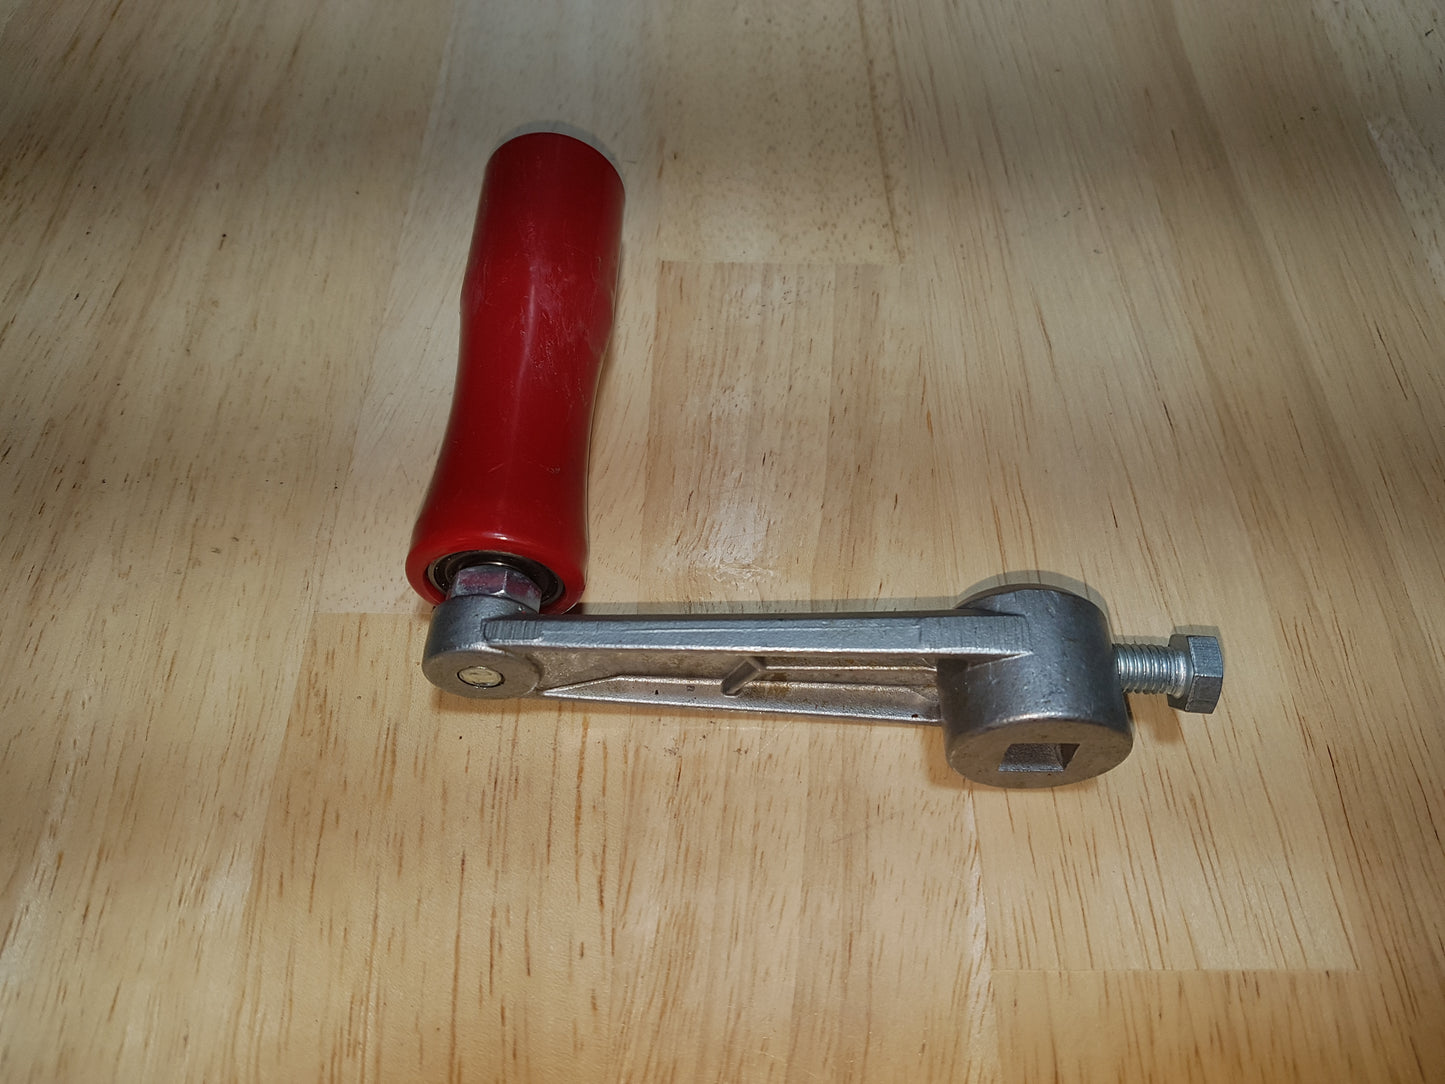 Extractor crank gear and handle